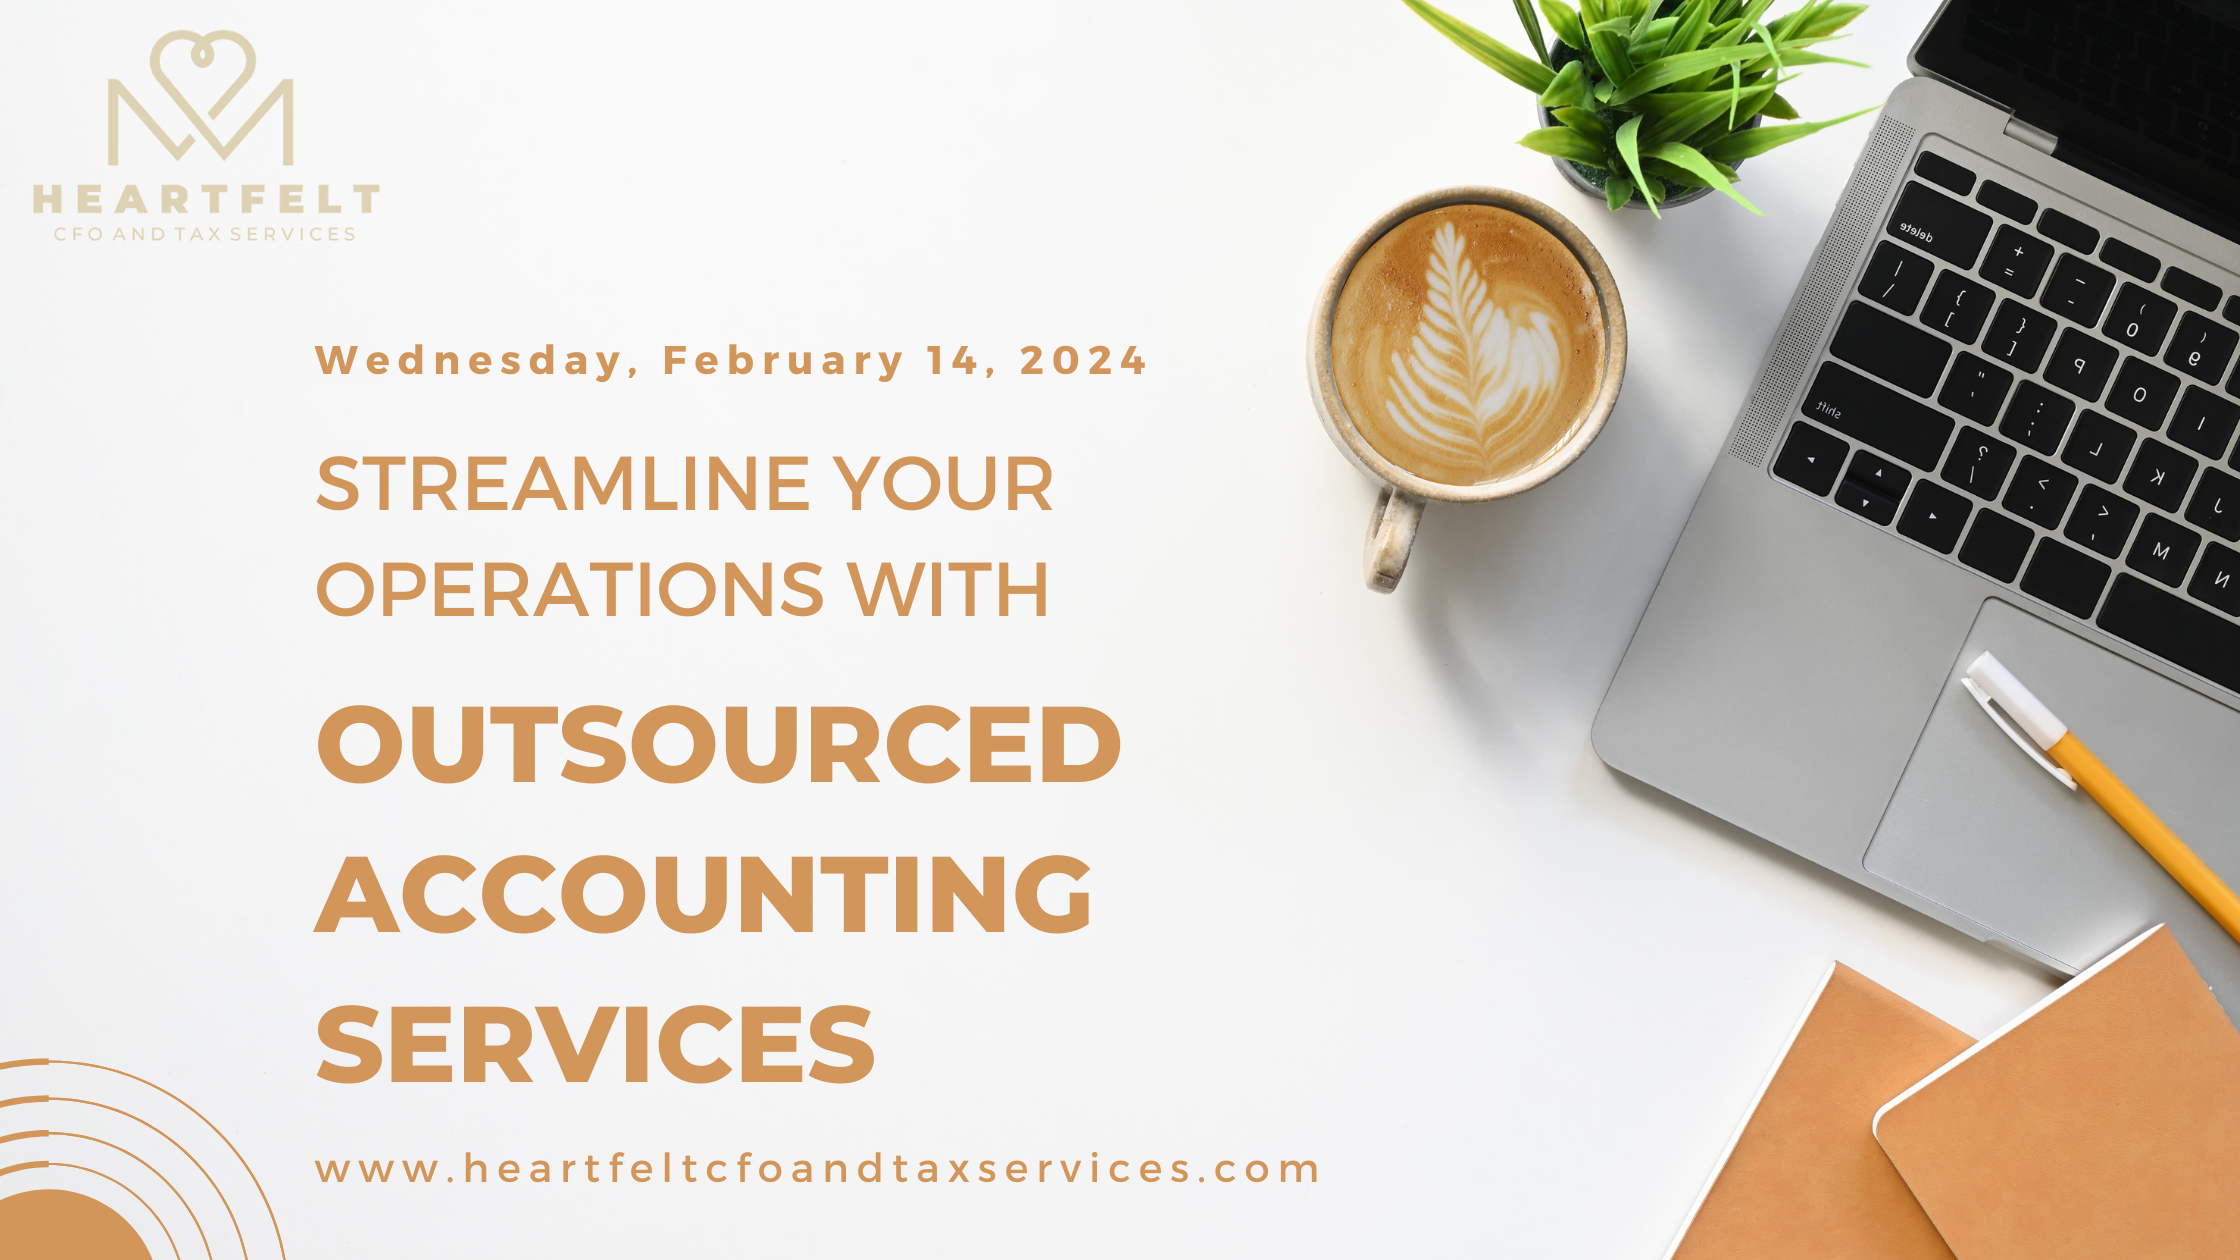 Streamline Your Operations with Outsourced Accounting Services